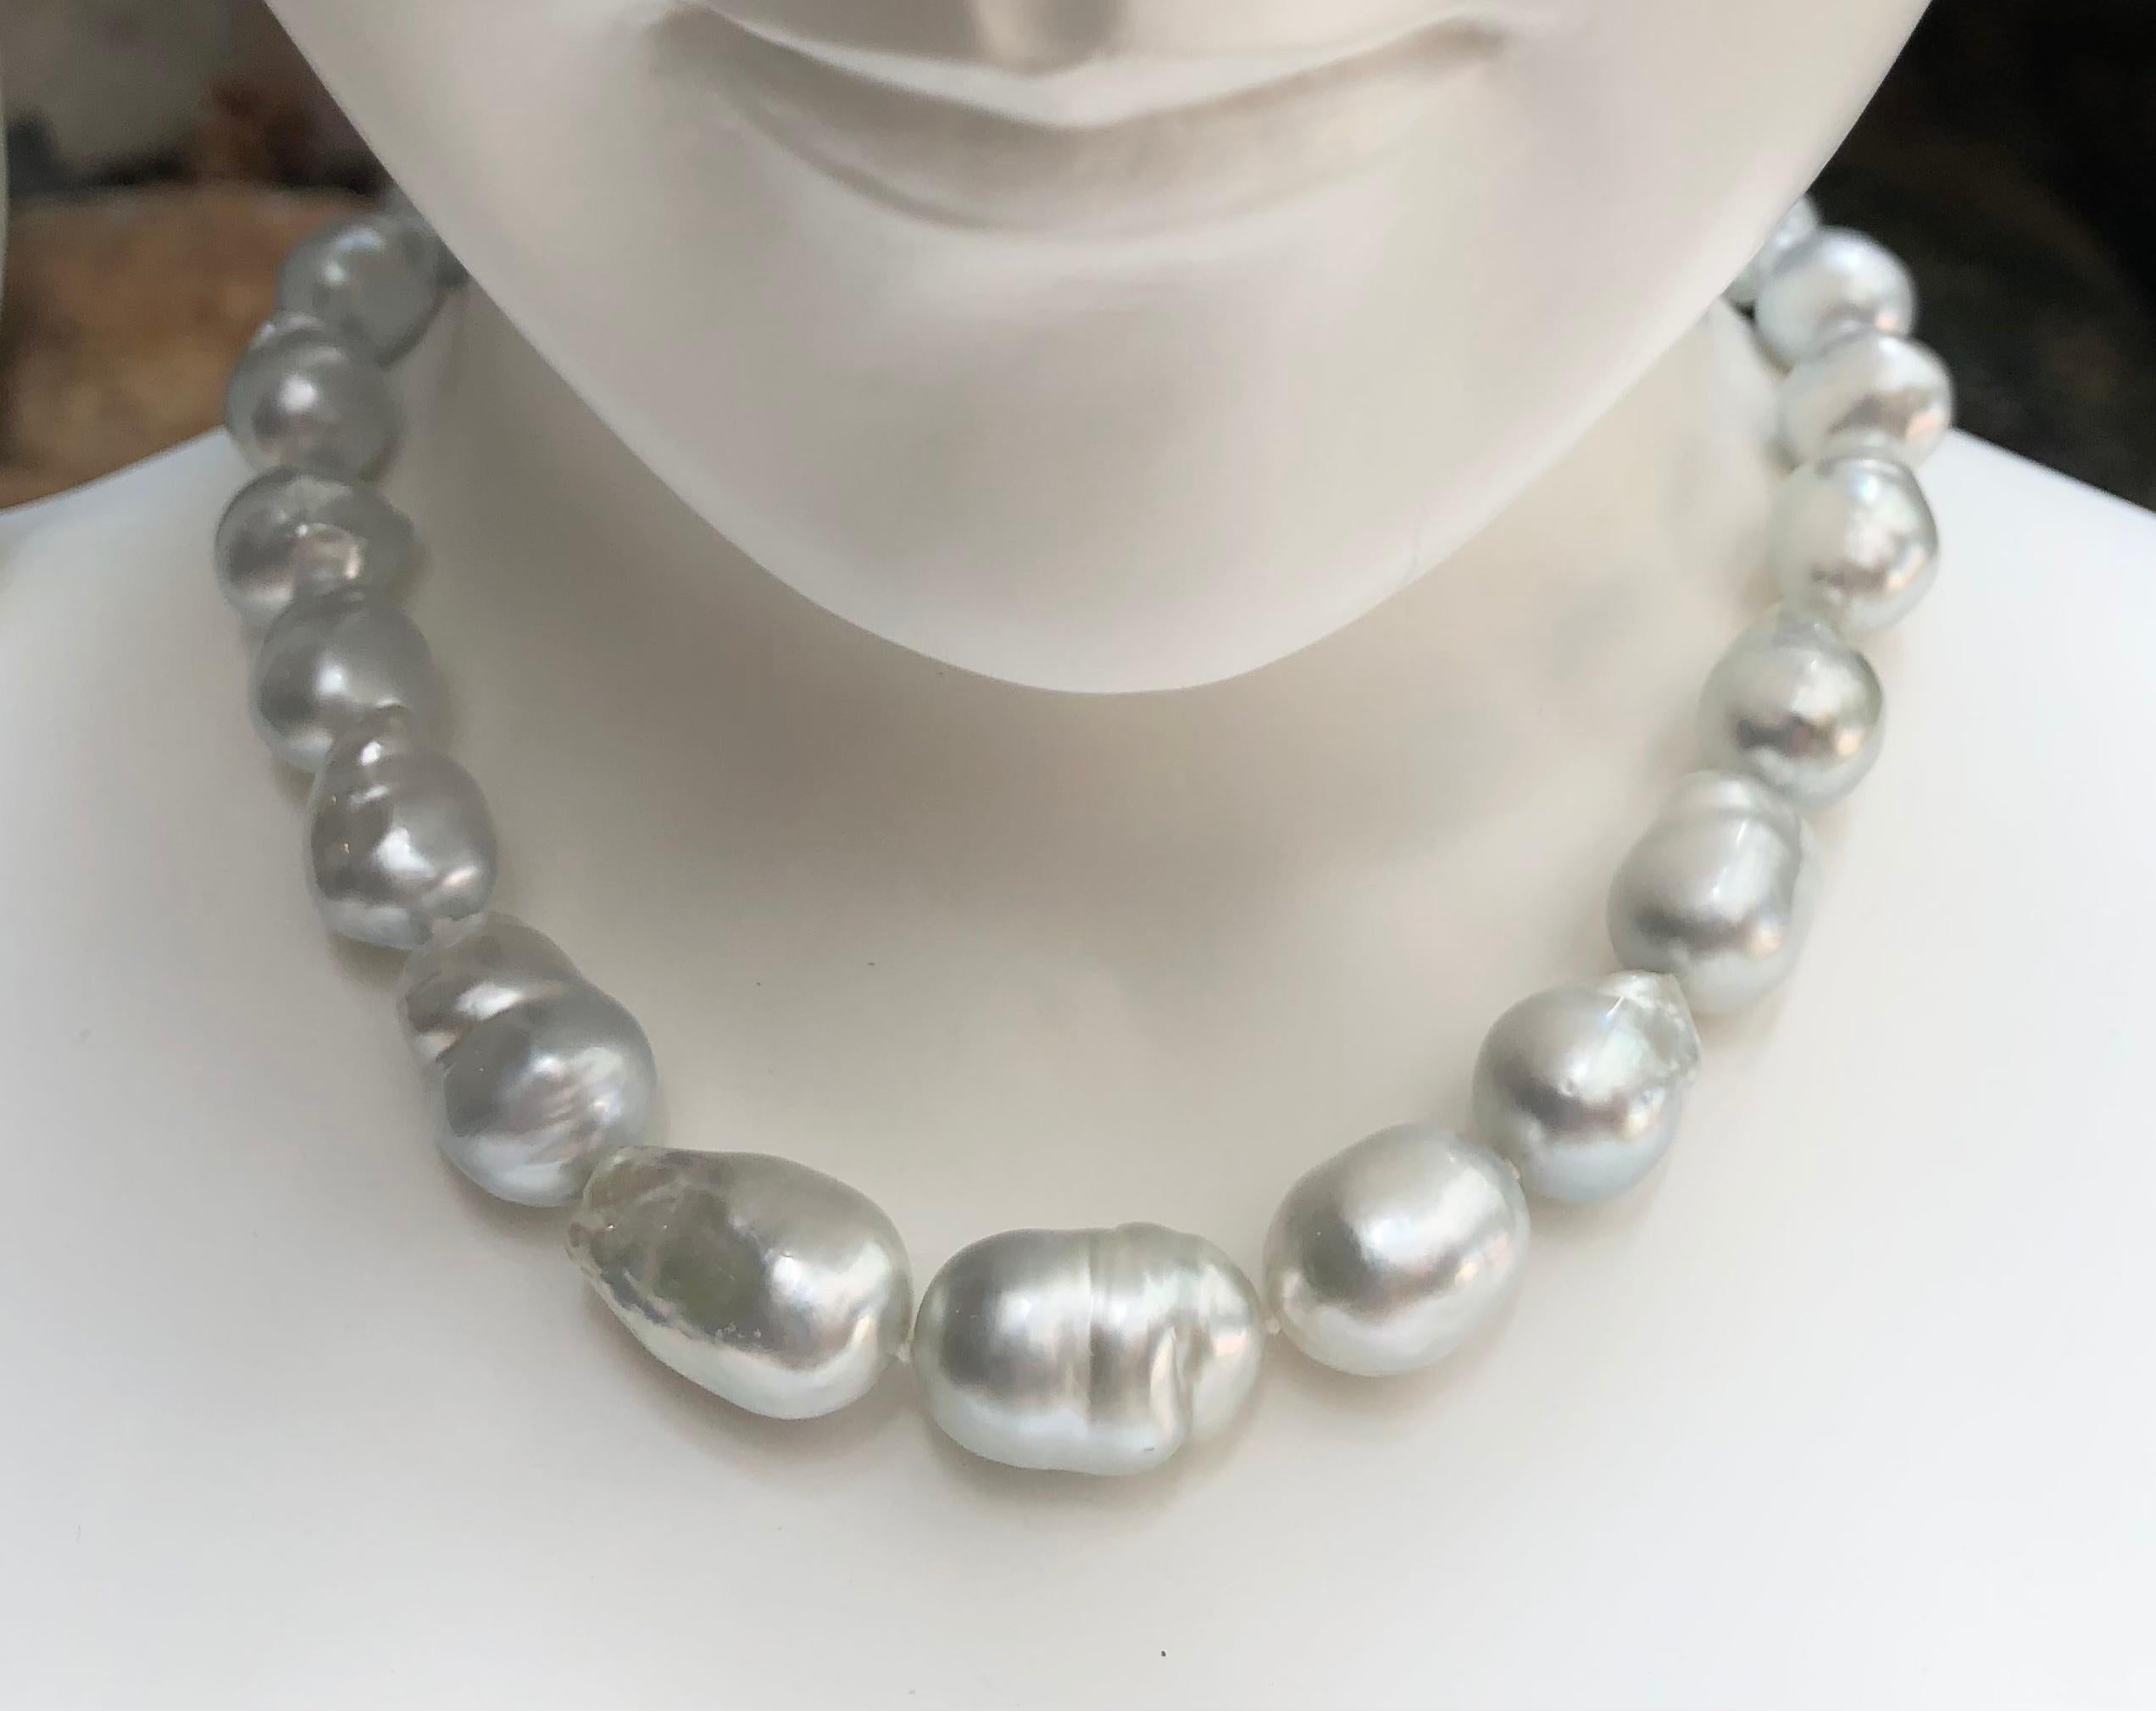 South Sea Pearl with 18 Karat Gold Clasp

Width: 1.3 cm 
Length: 41.0 cm
Total Weight: 82.63 grams

South Sea Pearl
Size: 15-12 mm
Pieces: 24

